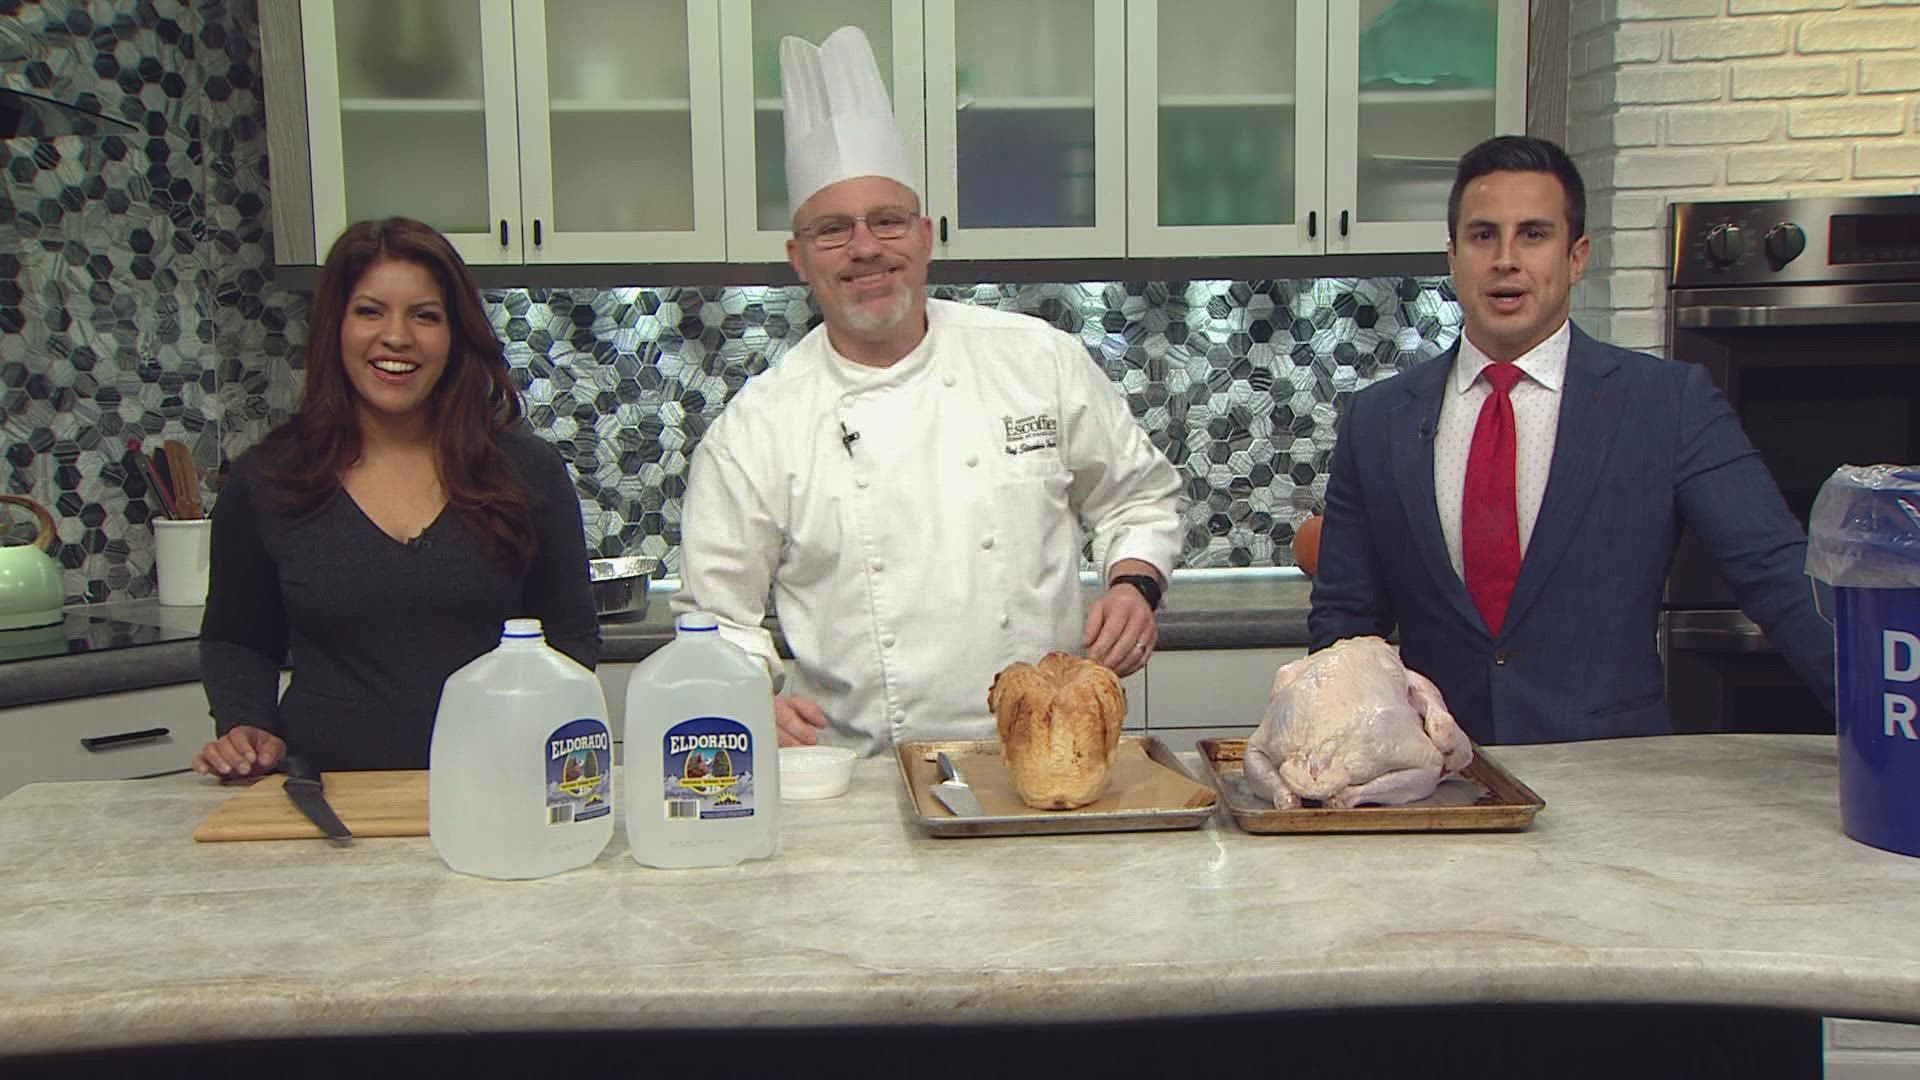 Chef Stephen Harden shows us tips on how to have the best Thanksgiving this year!